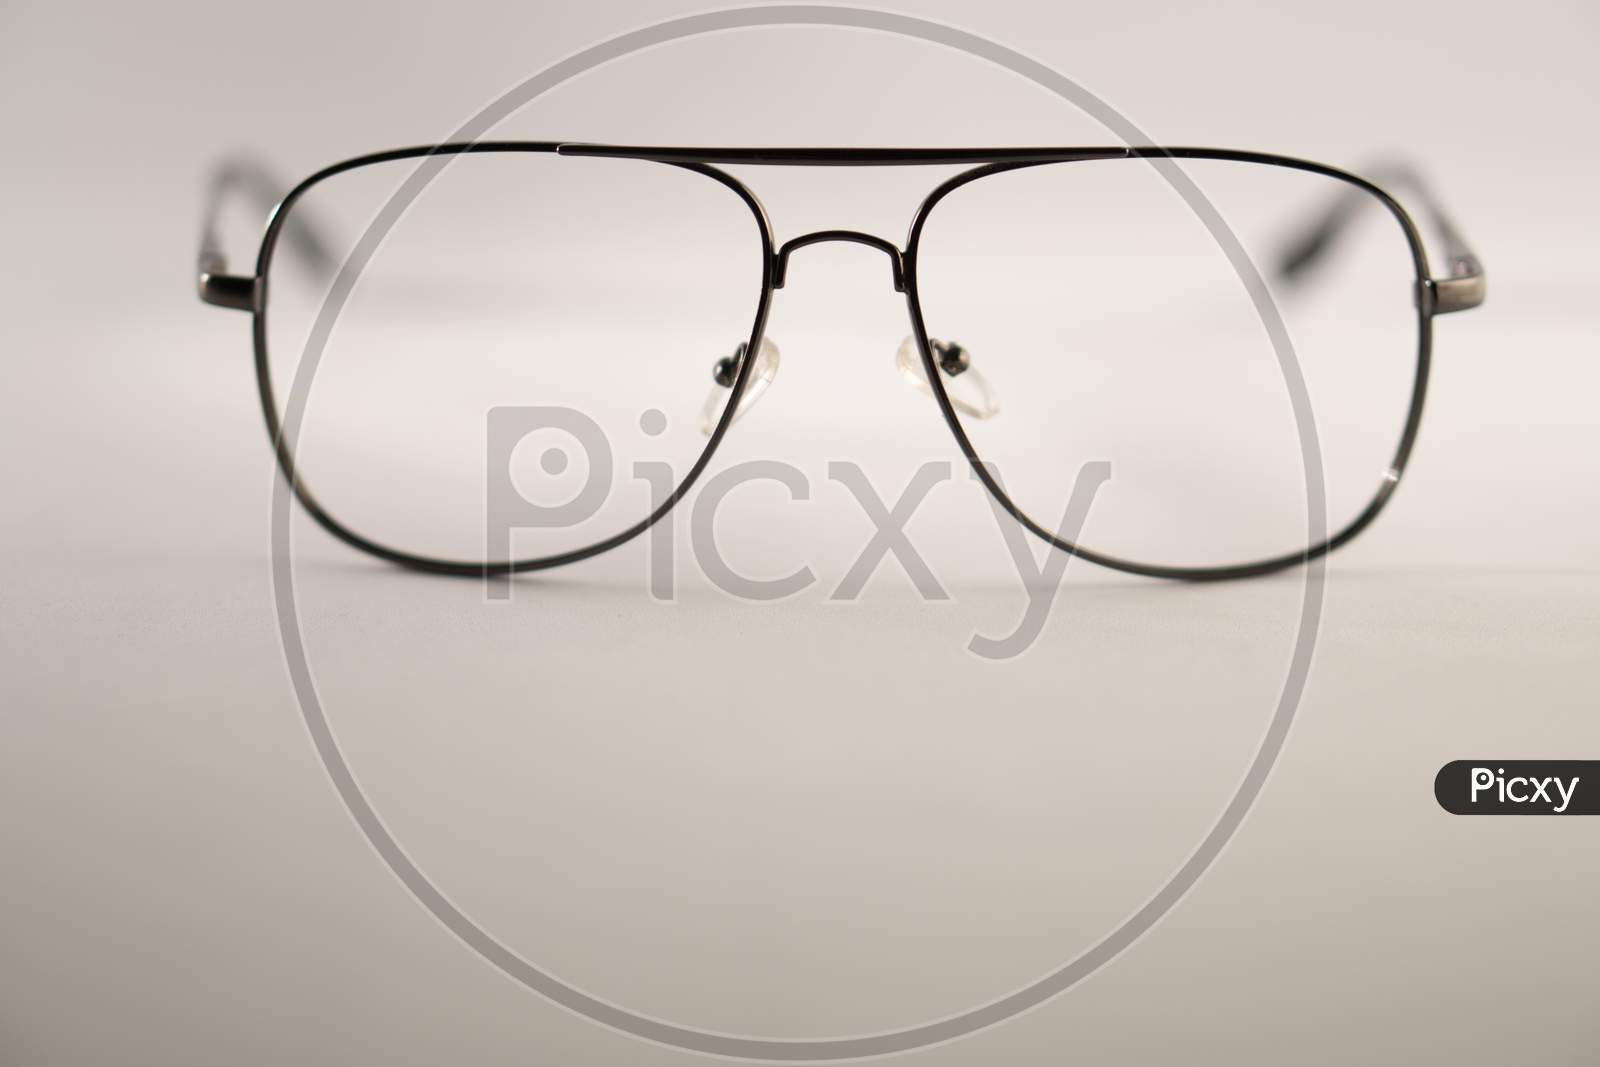 Black frame spectacle (eye glasses) isolated on a white background. Photo has empty space for text.